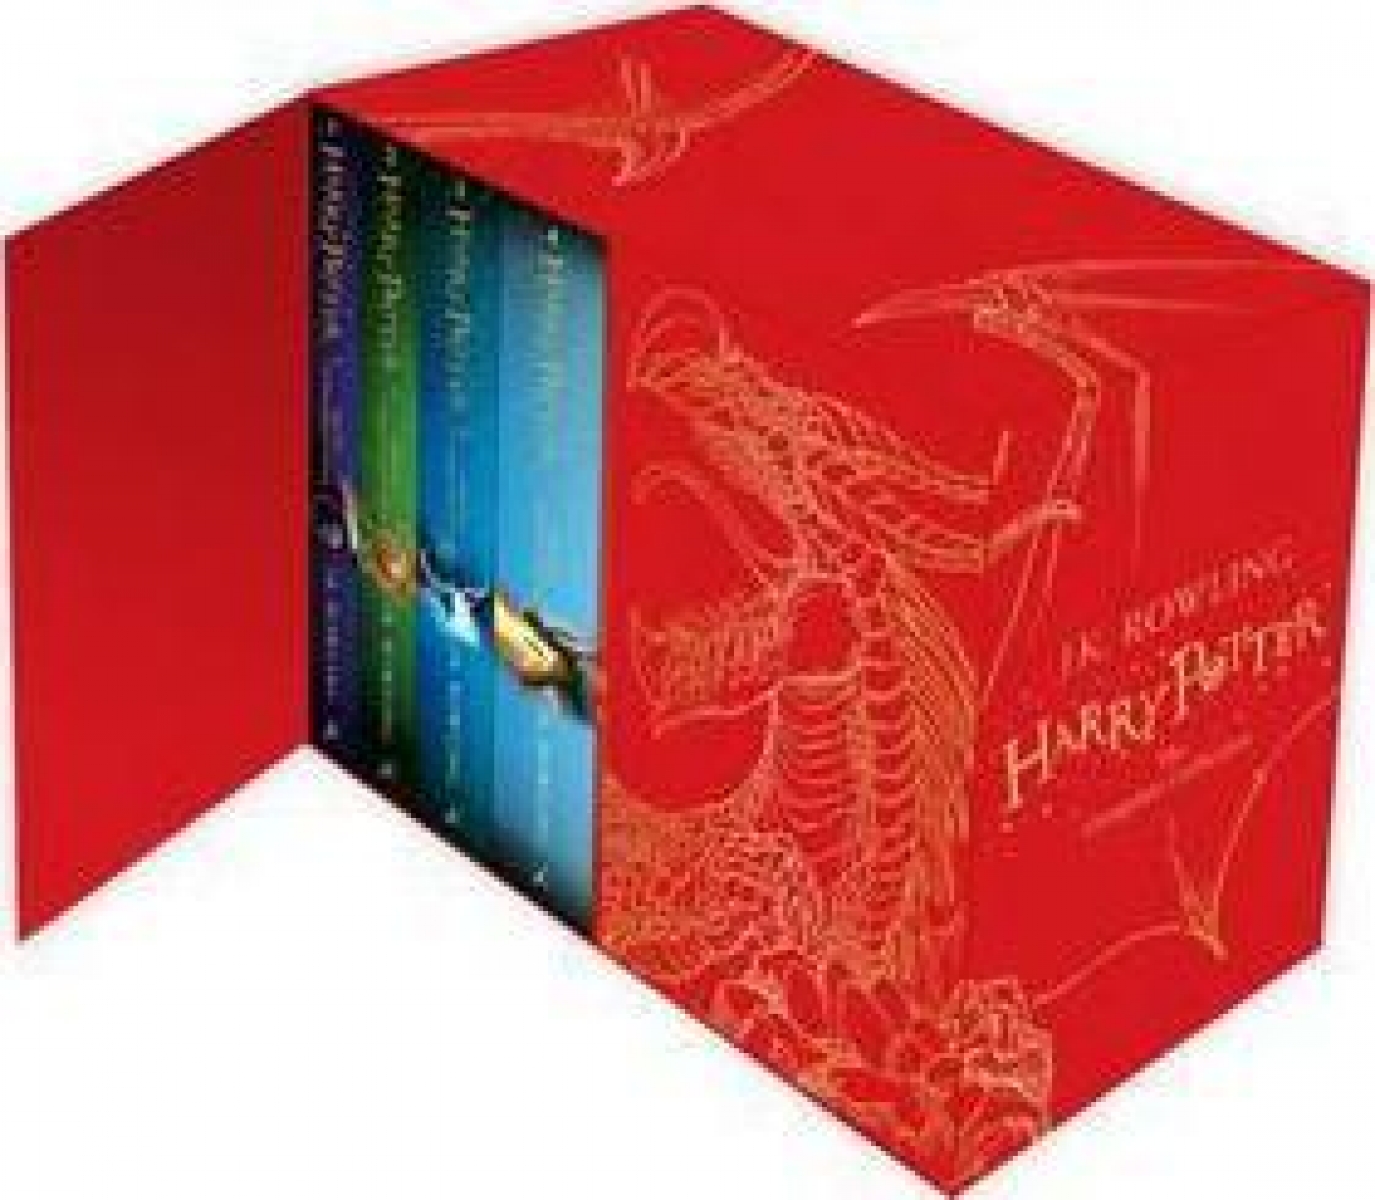 Rowling J.K. Harry Potter Box Set 7 Bk: The Complete Collection (Red box) 